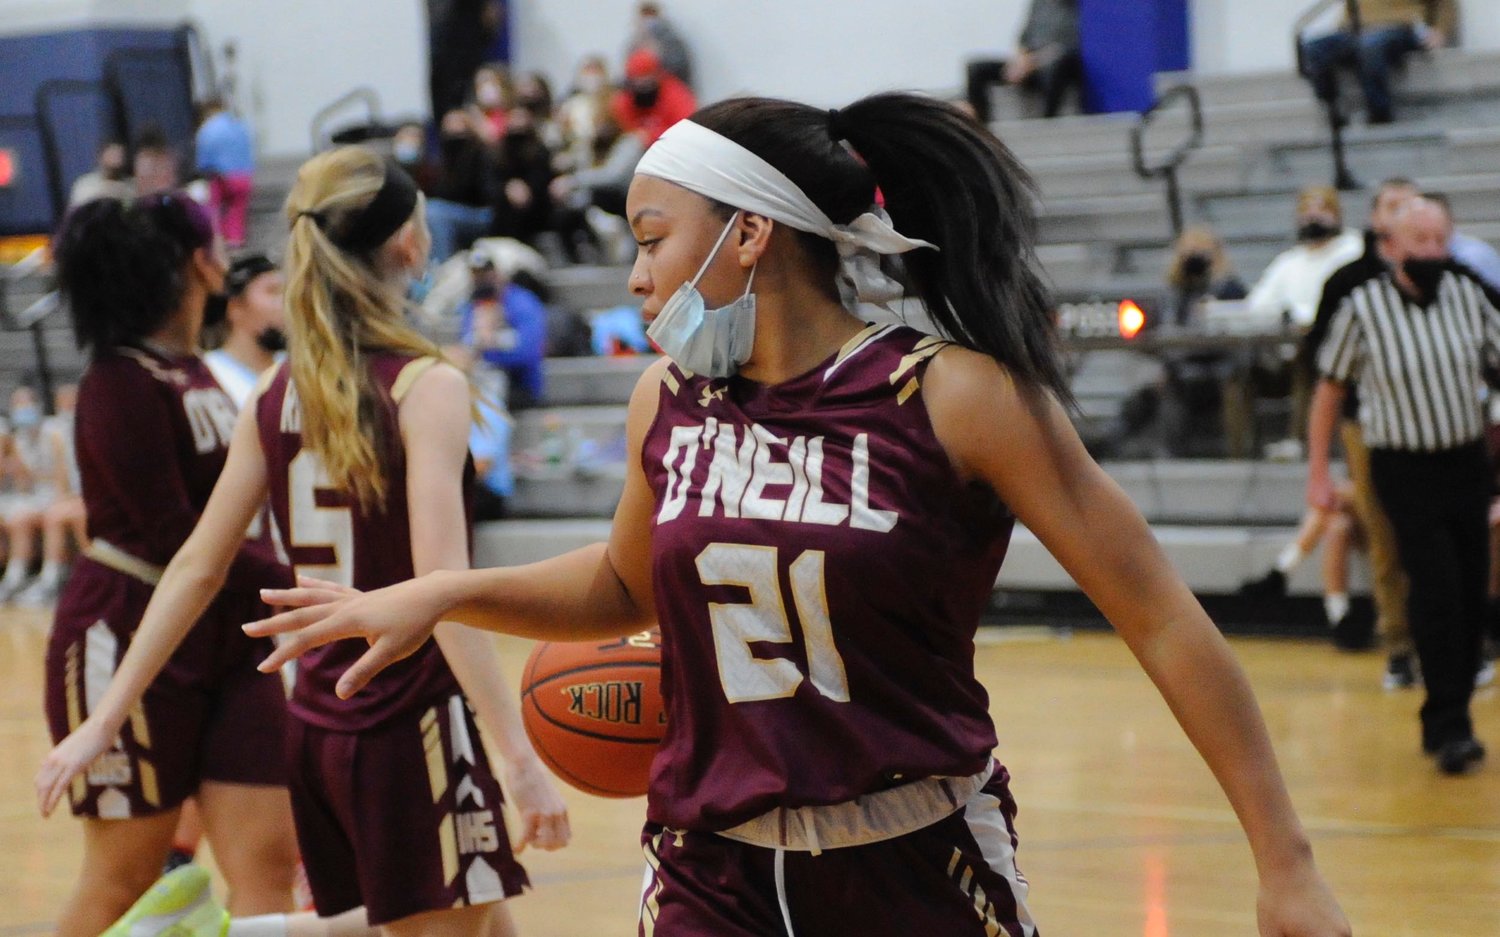 High-pointer. O’Neill’s Anrayah Lewis posted a game leading total of 26 points, including a pair of 3-pointers.